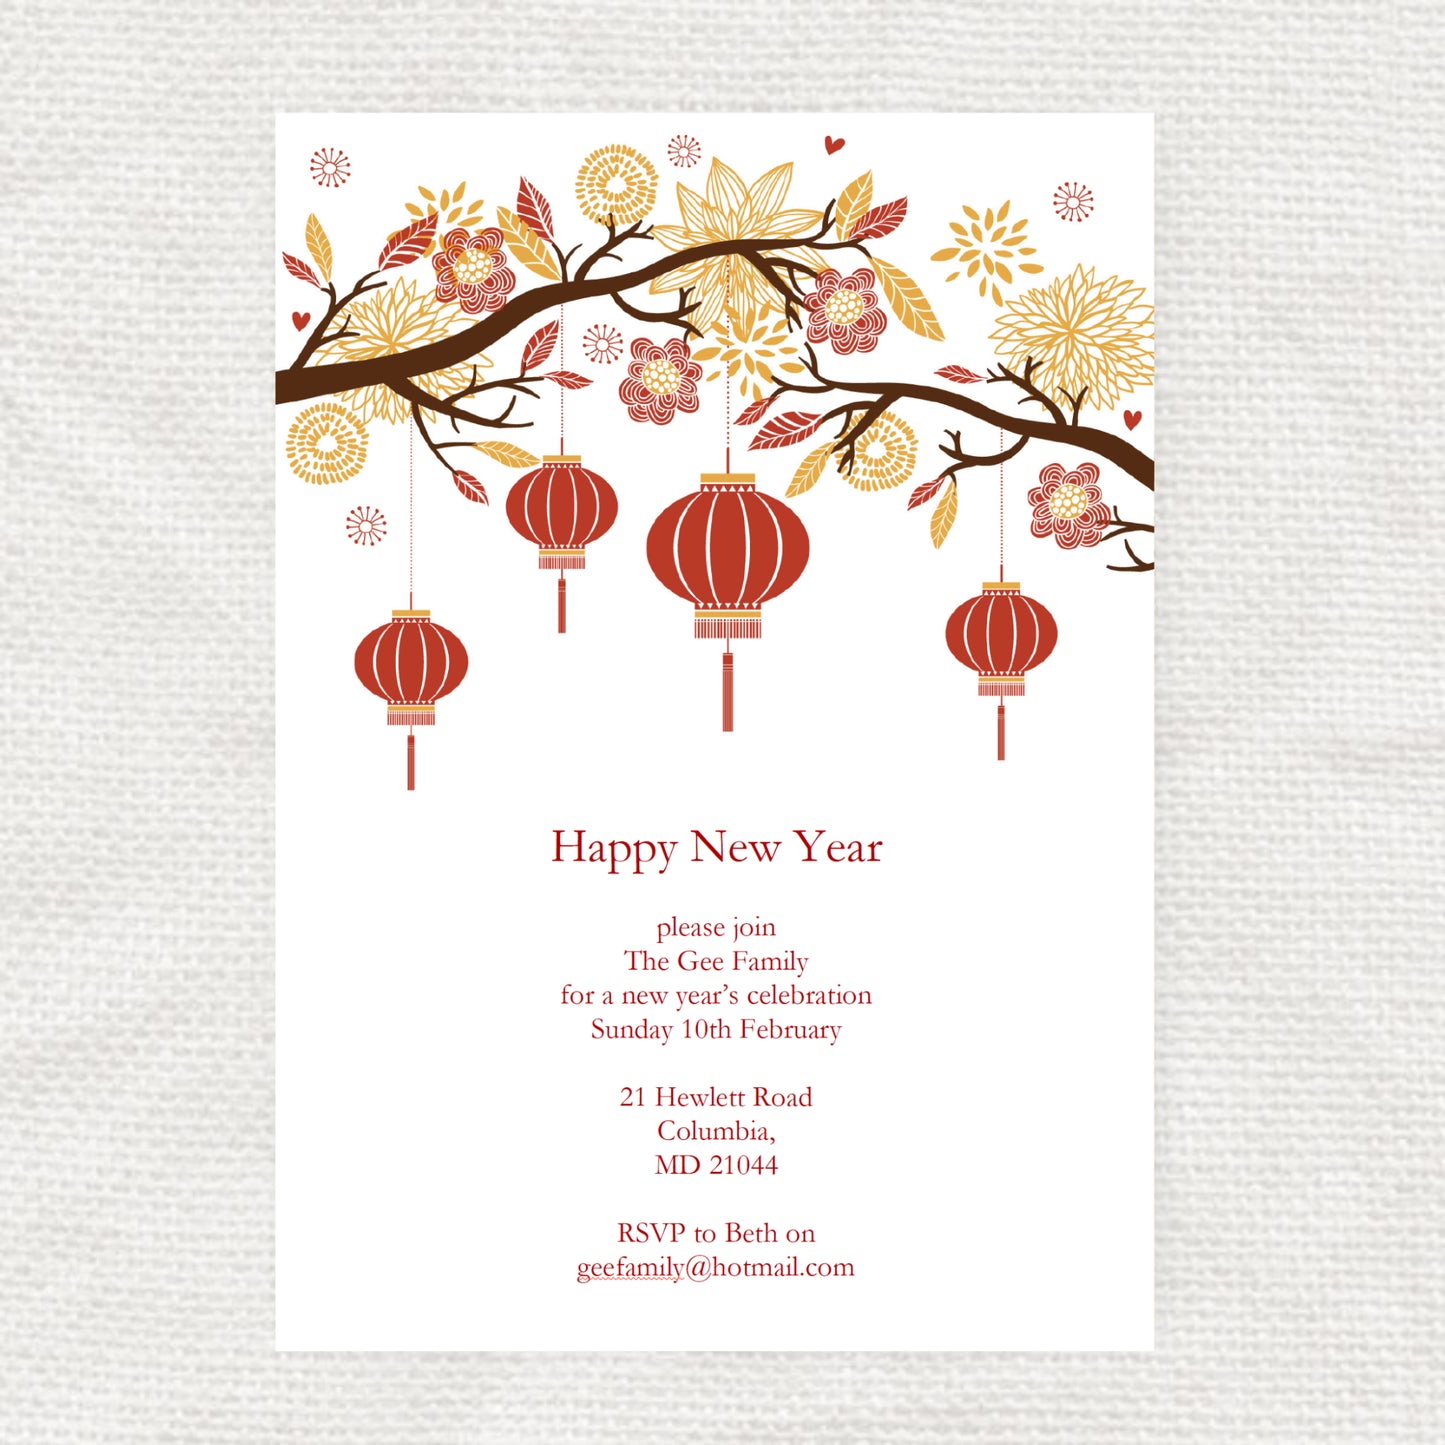 Chinese new year invitation with red lantern design